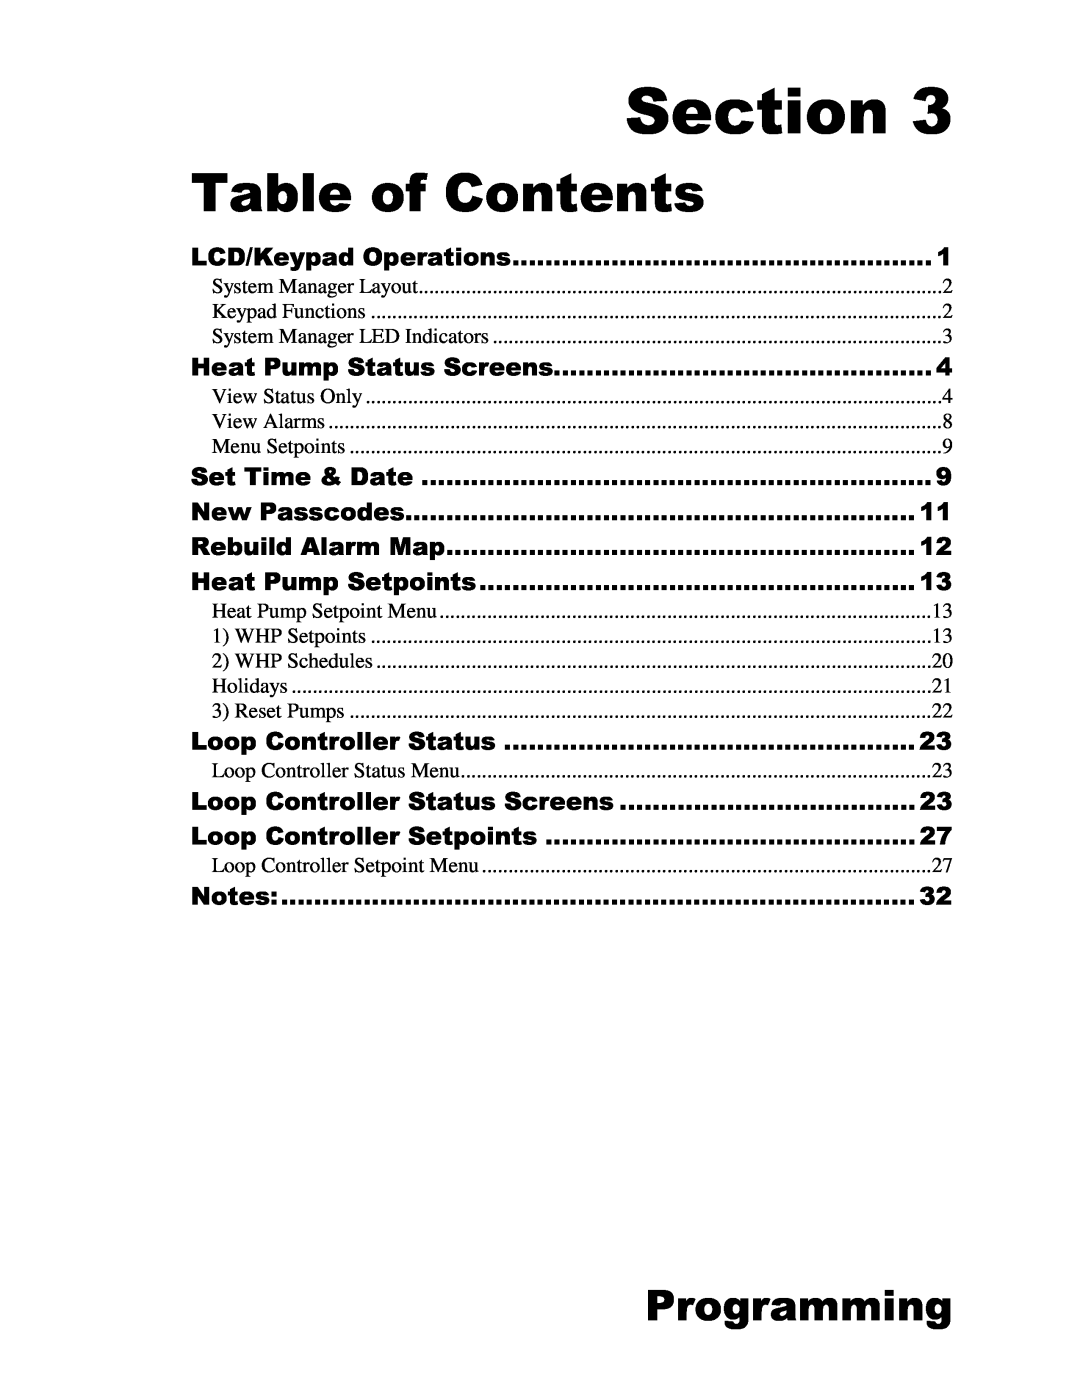 Heat Controller Water Source Heat Pump manual Programming, Section, Table of Contents 